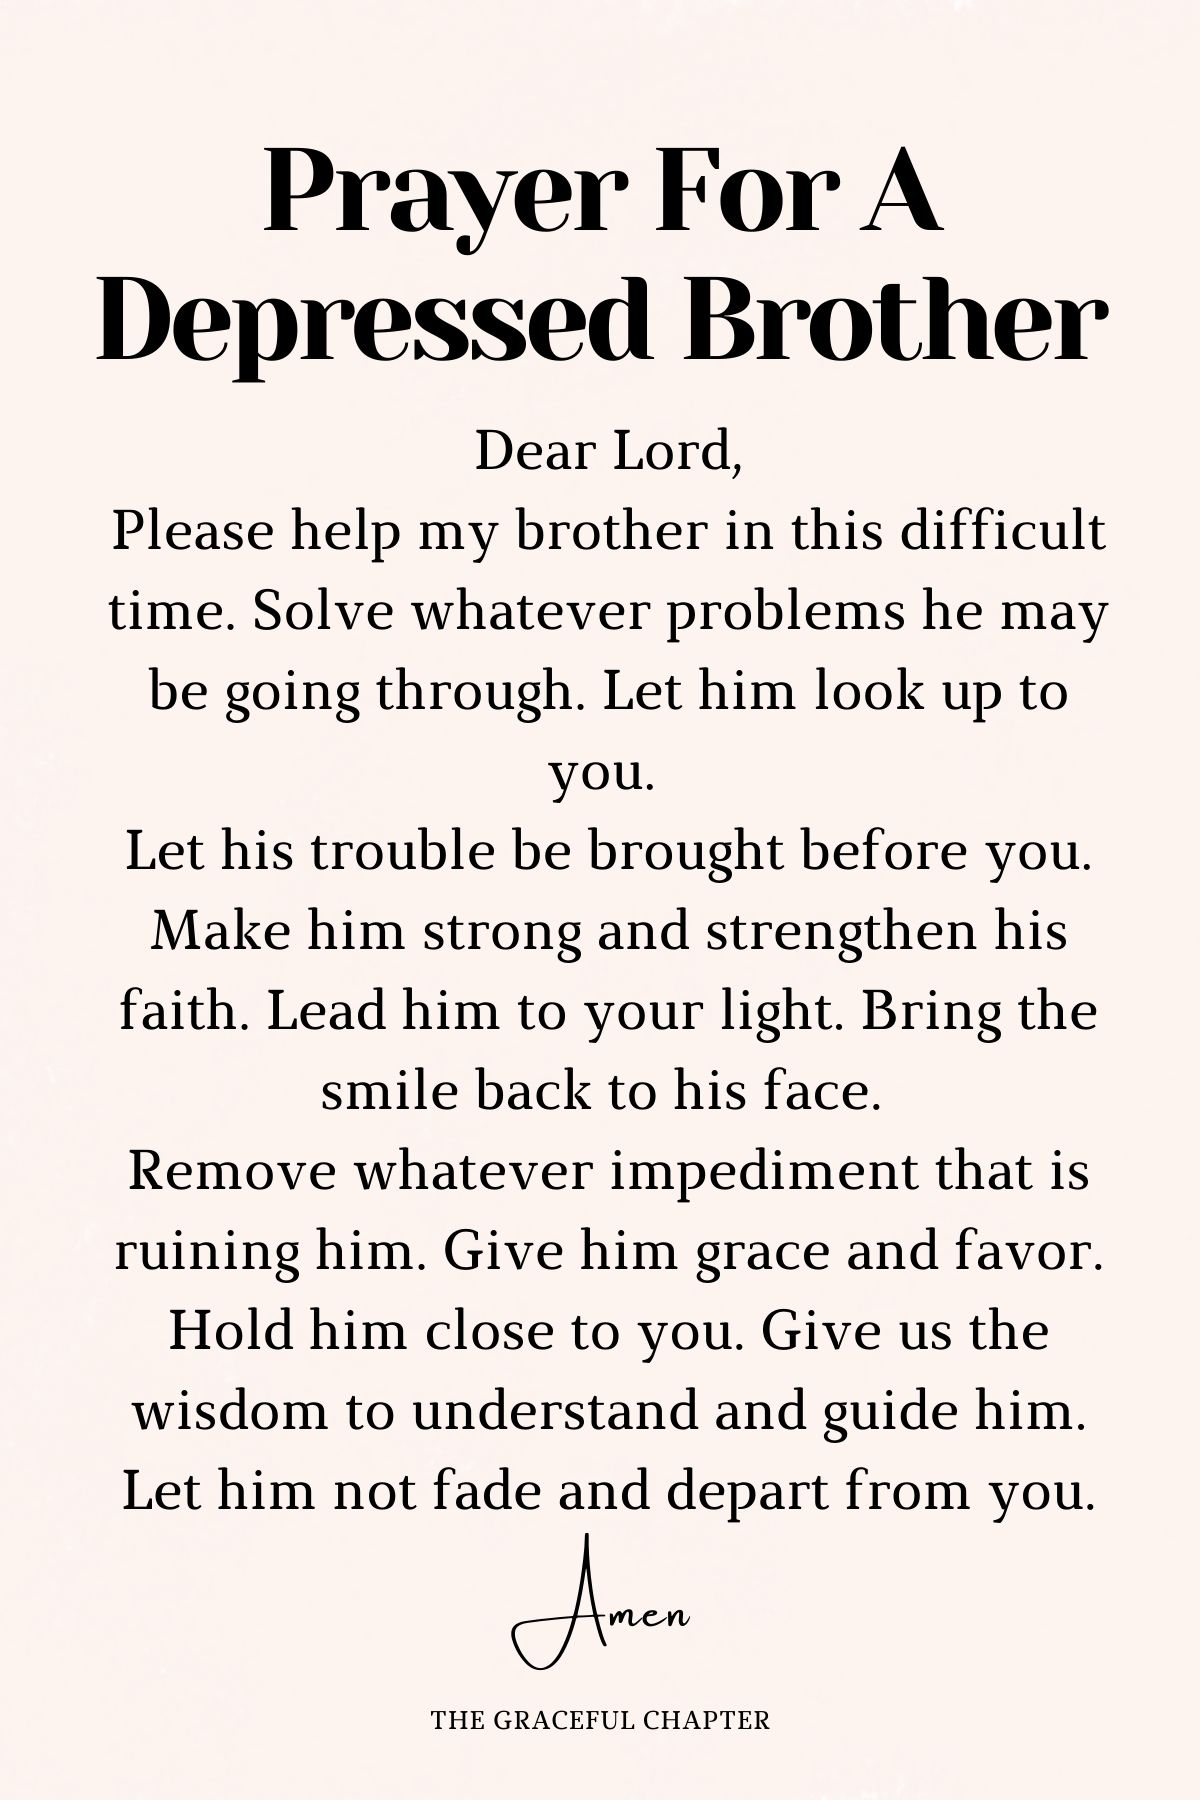 Prayer for a depressed brother